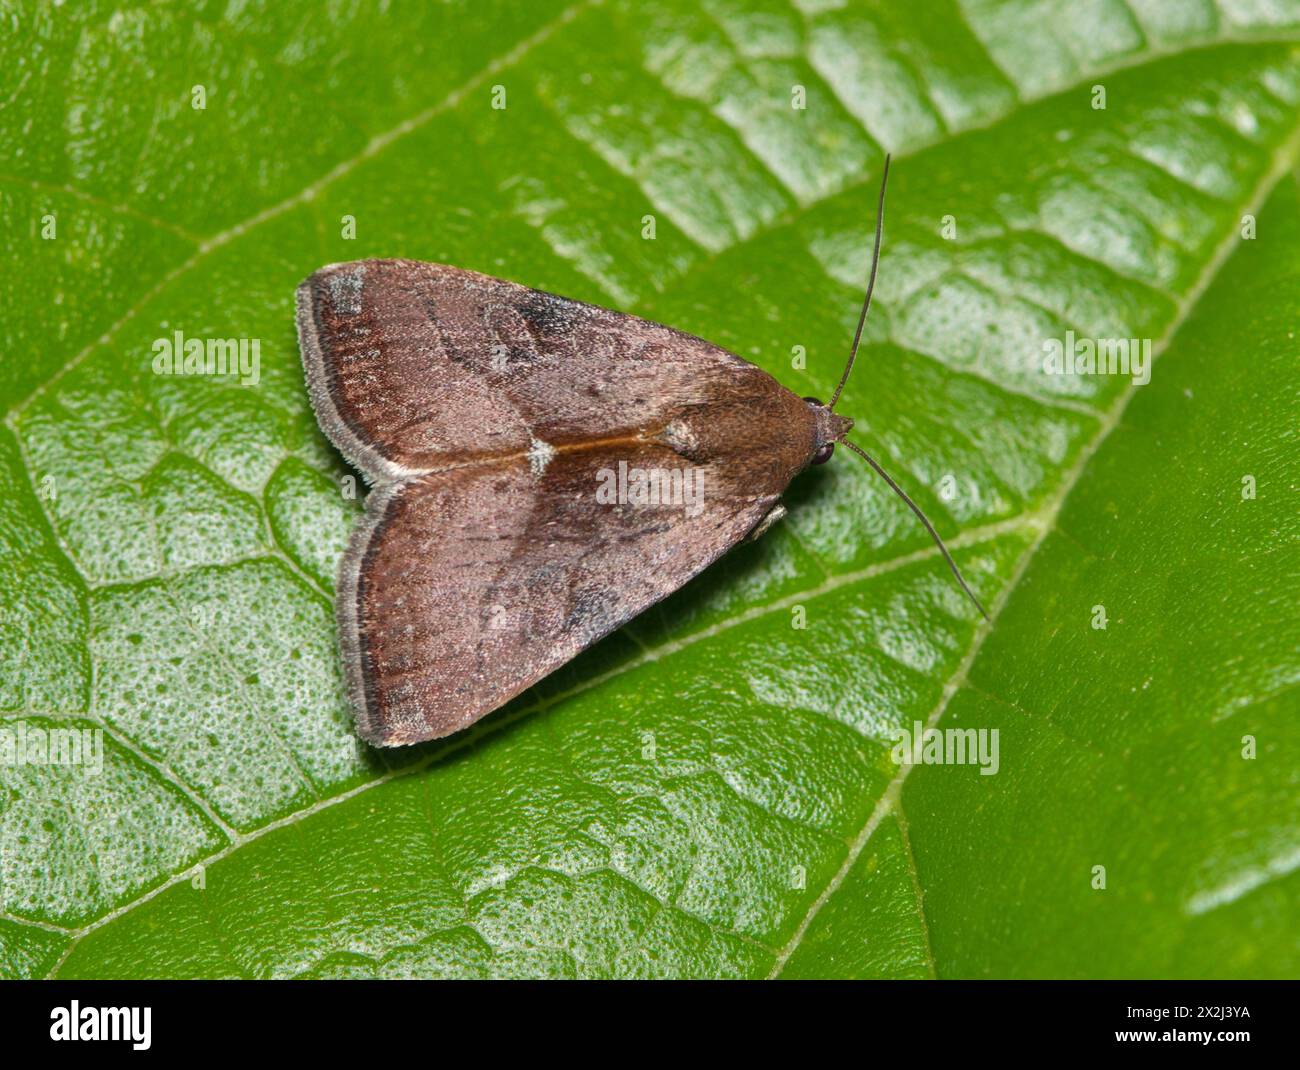 Wedgling Moth (Galgula partita) insect on green leaf, nature Springtime garden pest control agriculture dorsal view. Stock Photo